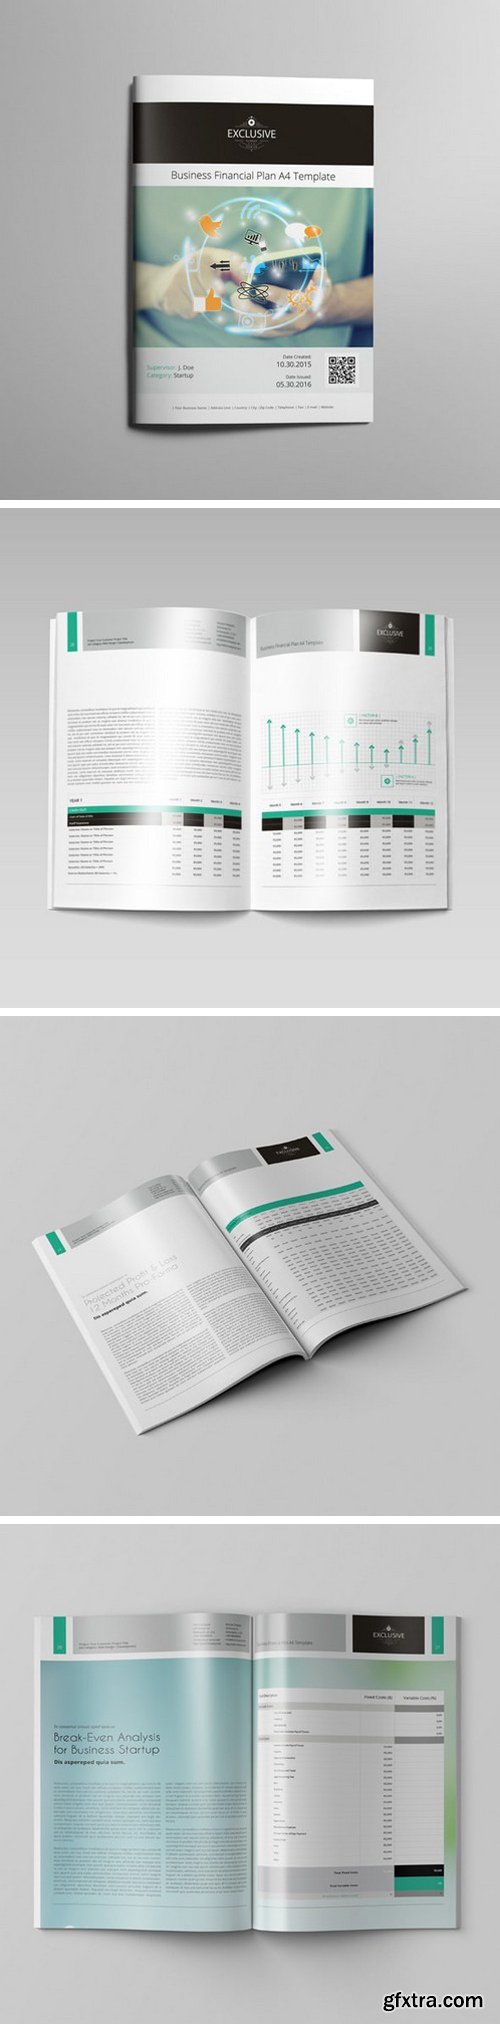 KeBoto - Business Financial Plan A4 Template 000137